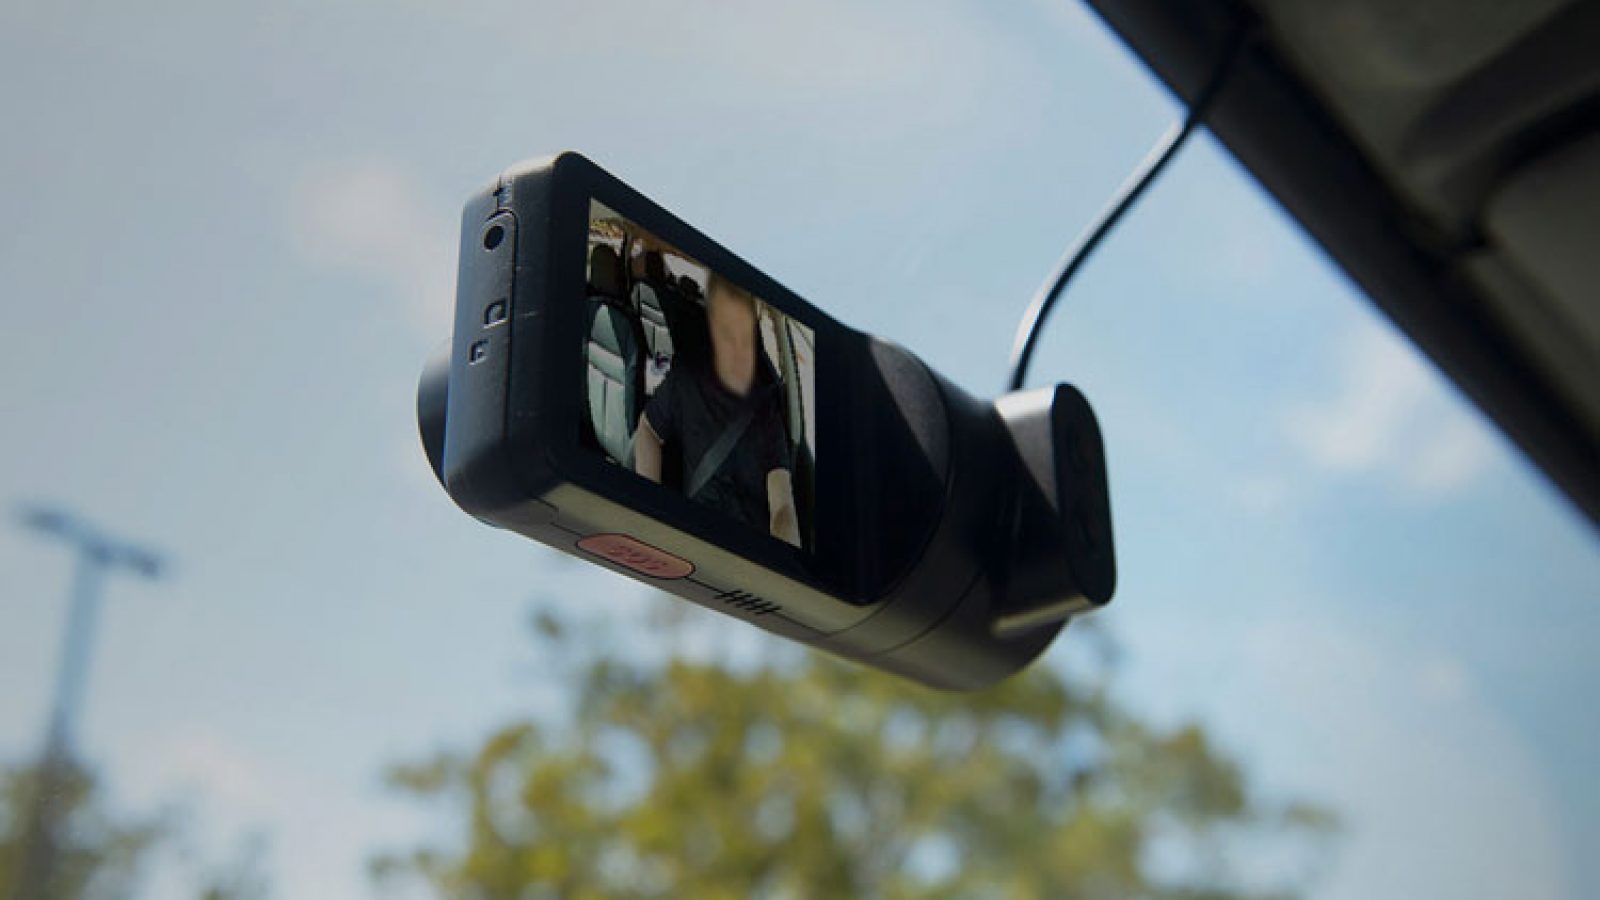 A Guide To Implementing Fleet Dash Cams For Safety